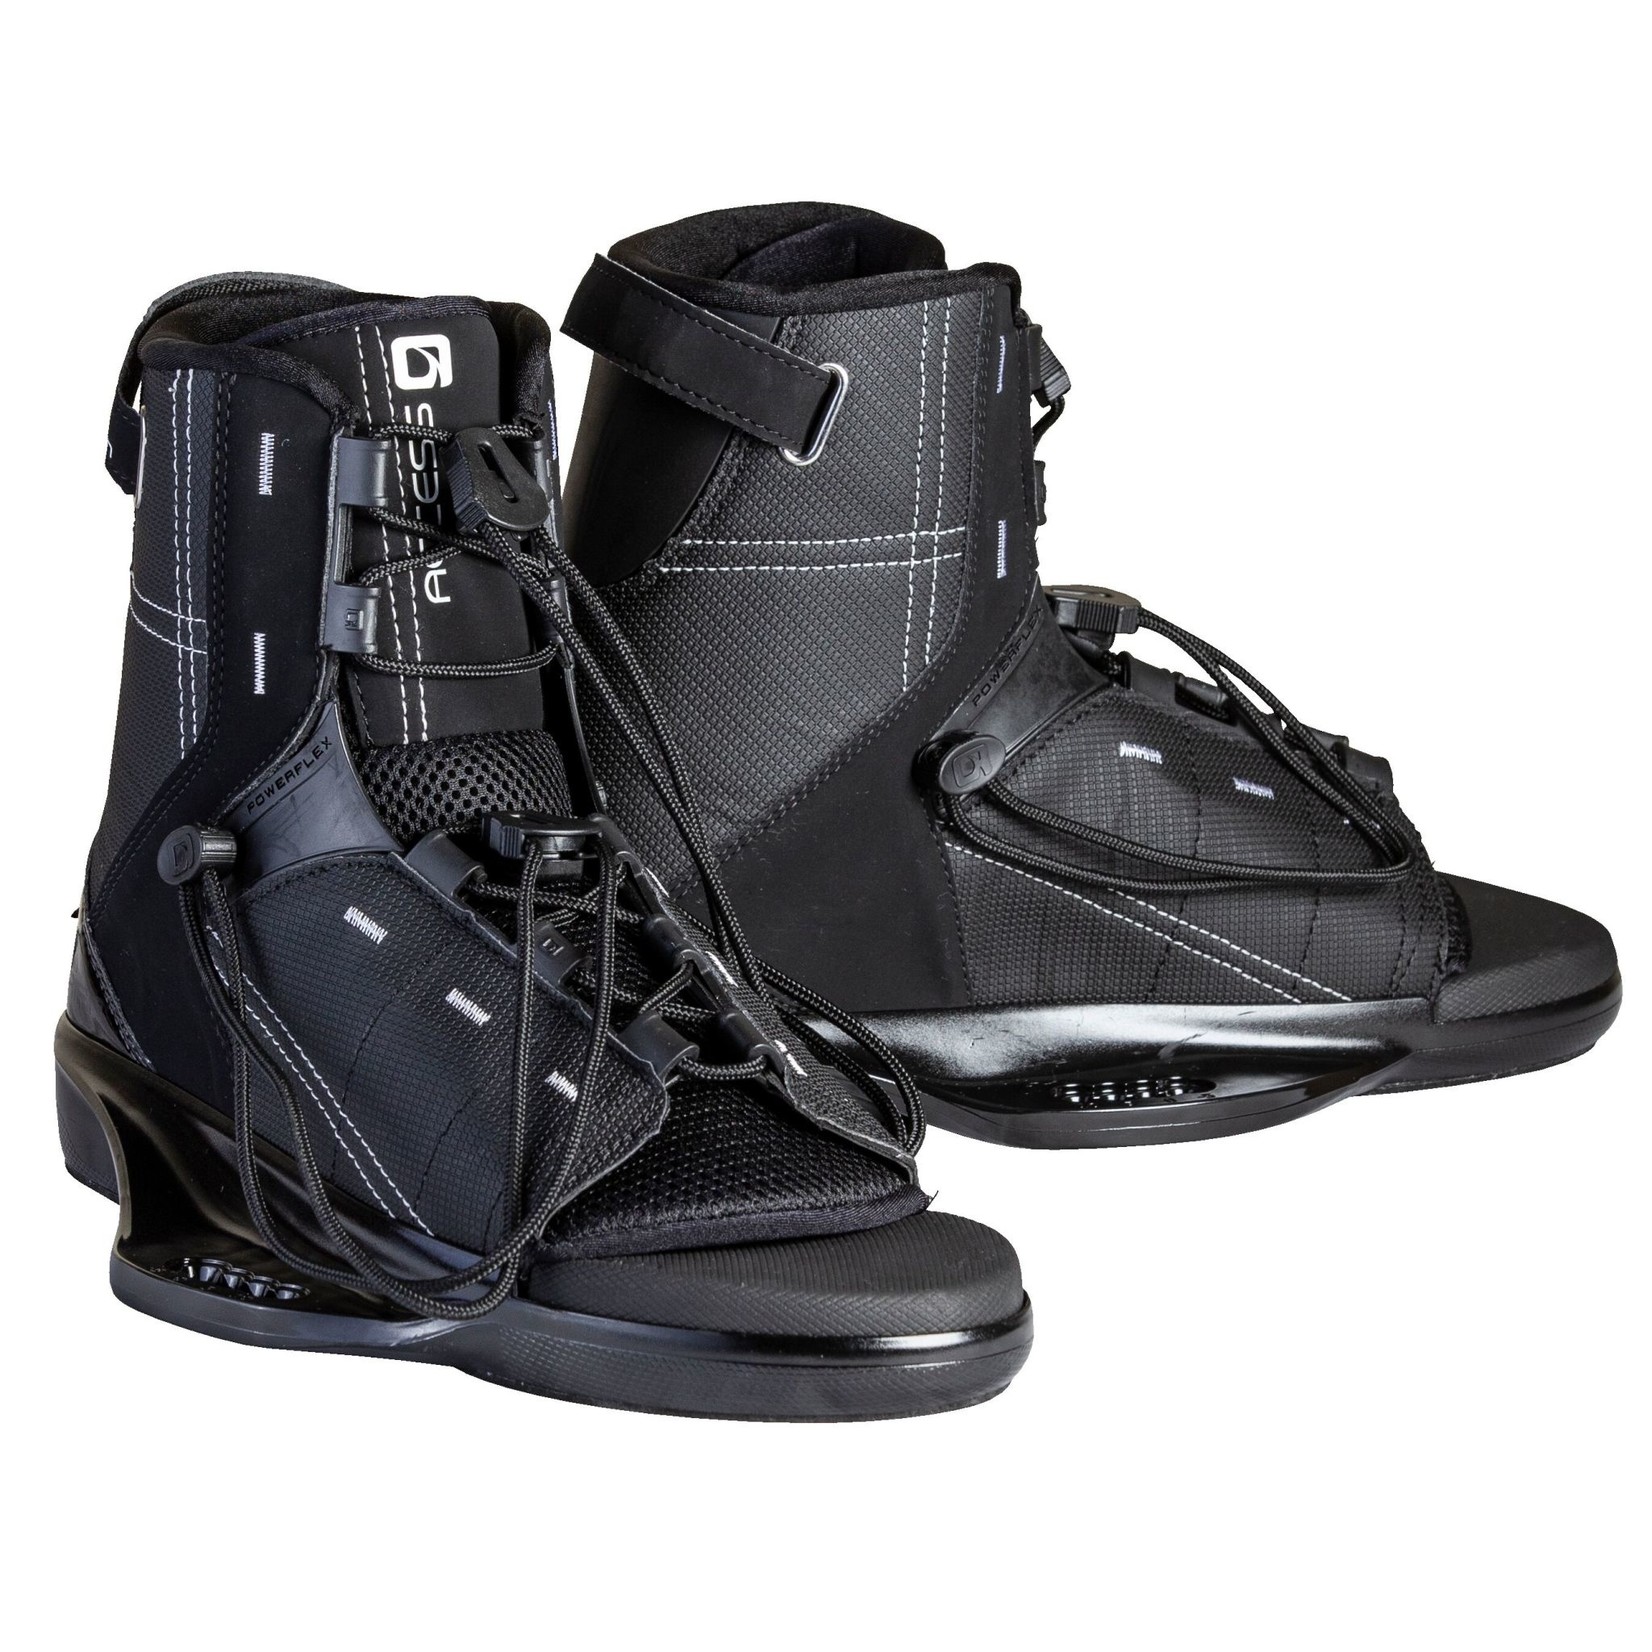 O'Brien 2021 Access Wakeboard Boot